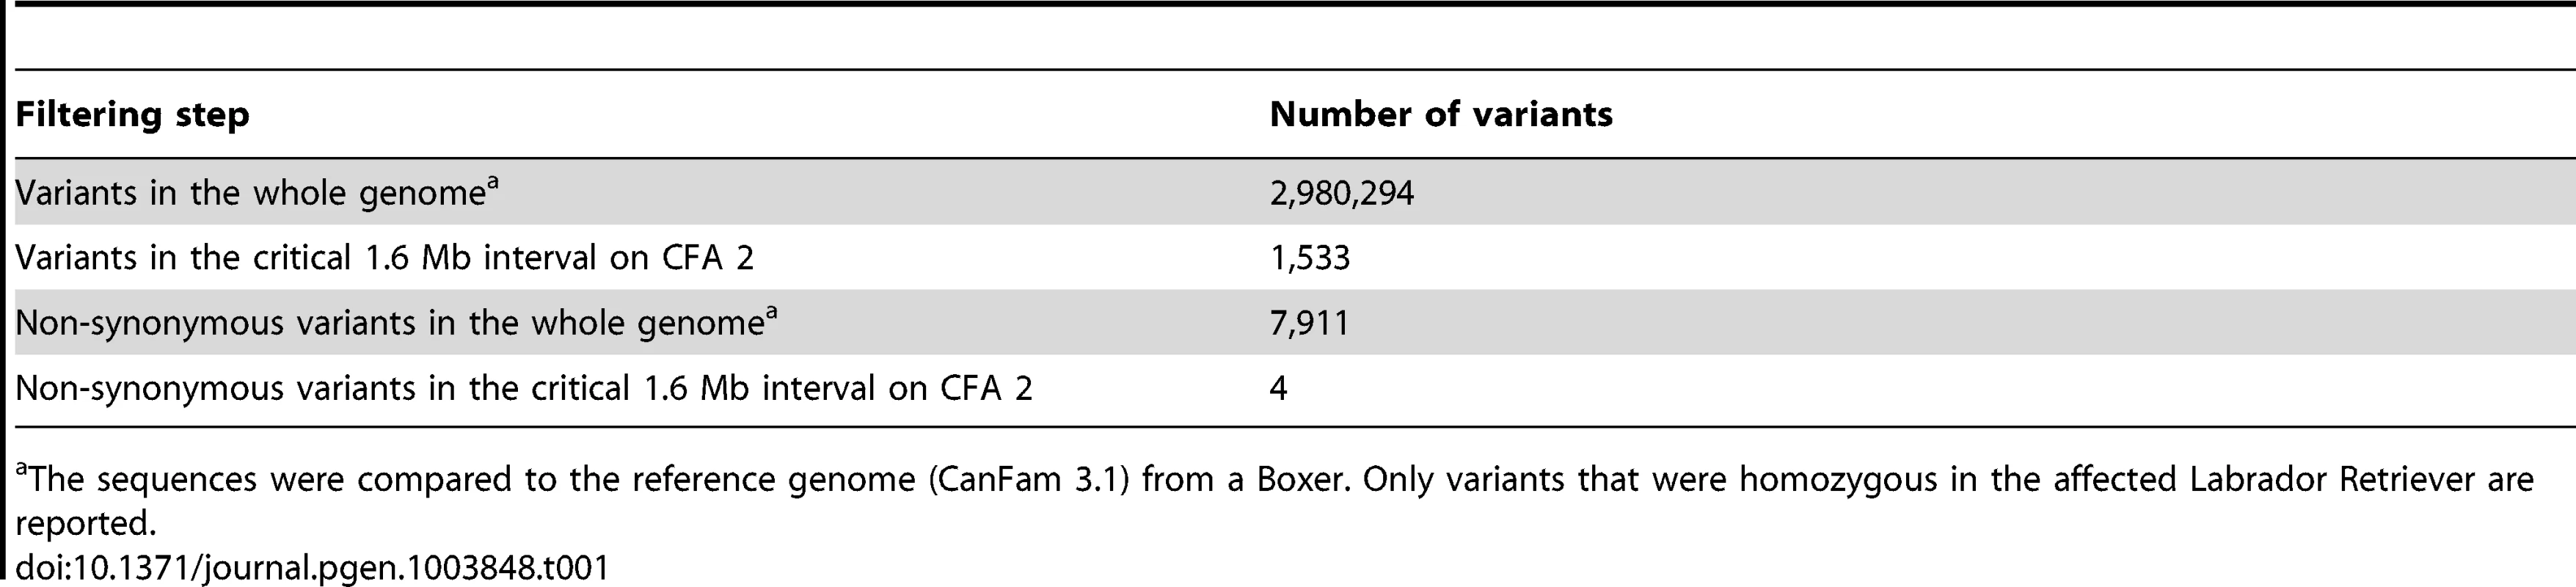 Variants detected by whole genome re-sequencing of an affected Labrador Retriever.